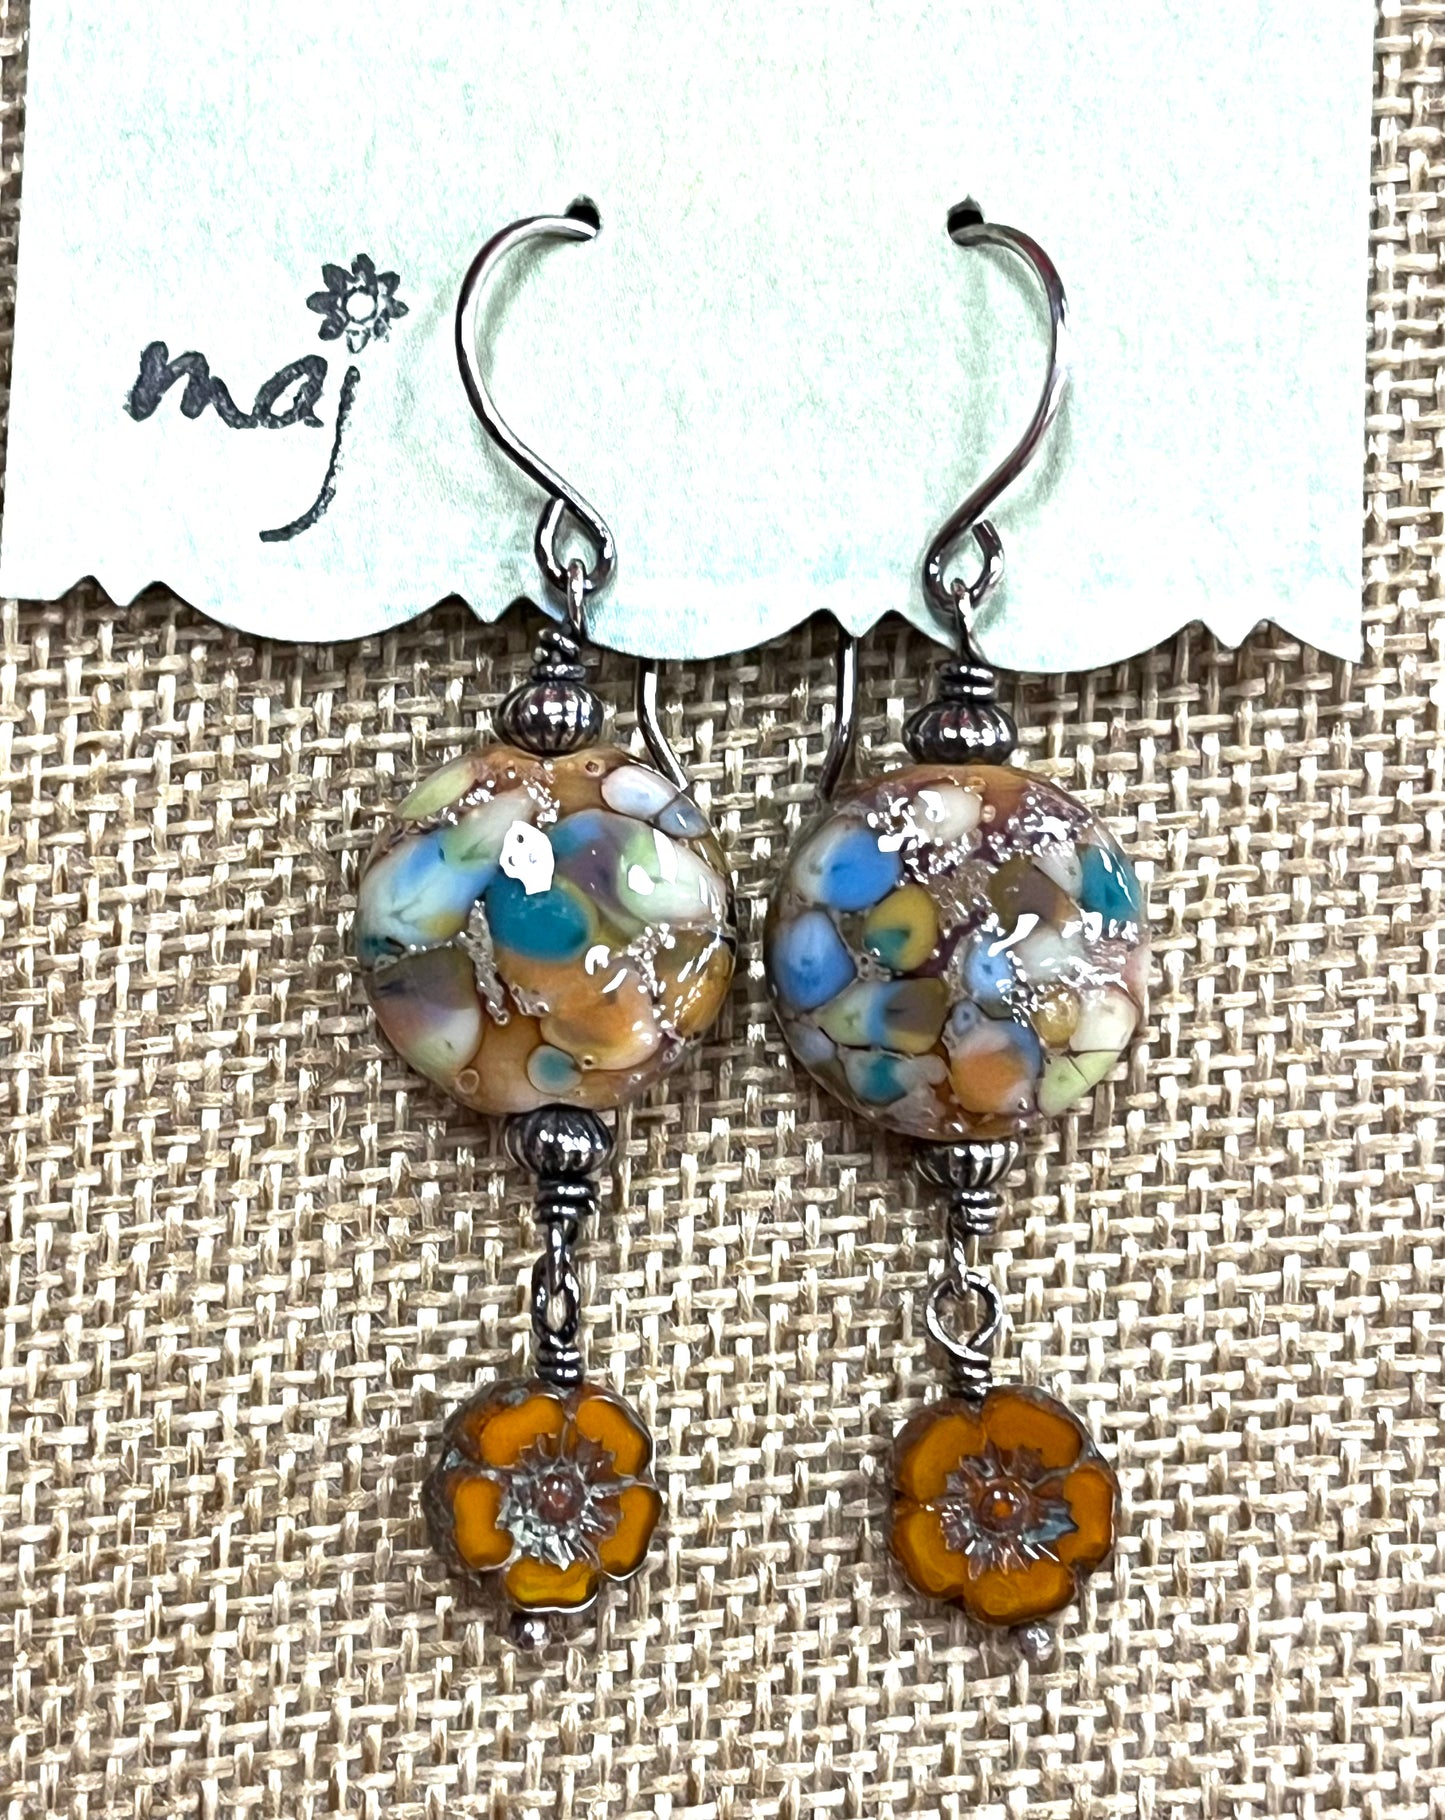 Autumn Confetti - Artisan Glass, Czech Glass and Sterling Silver Earrings